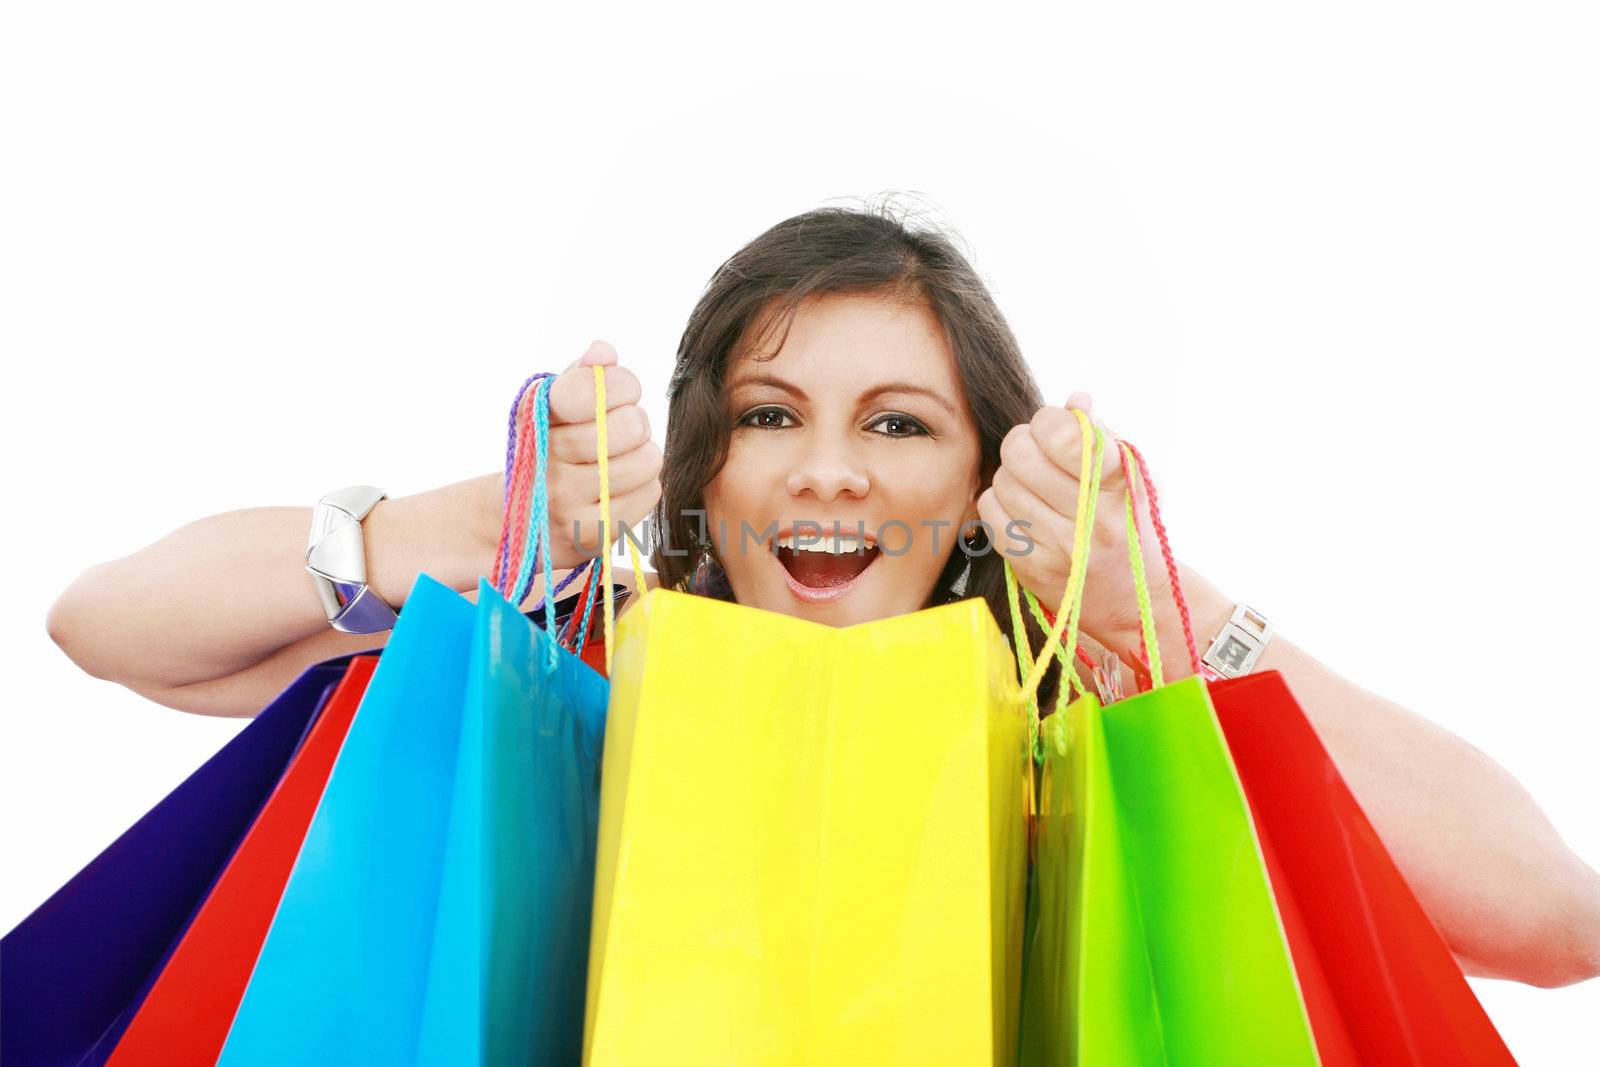 Shopping woman excited, isolated on white